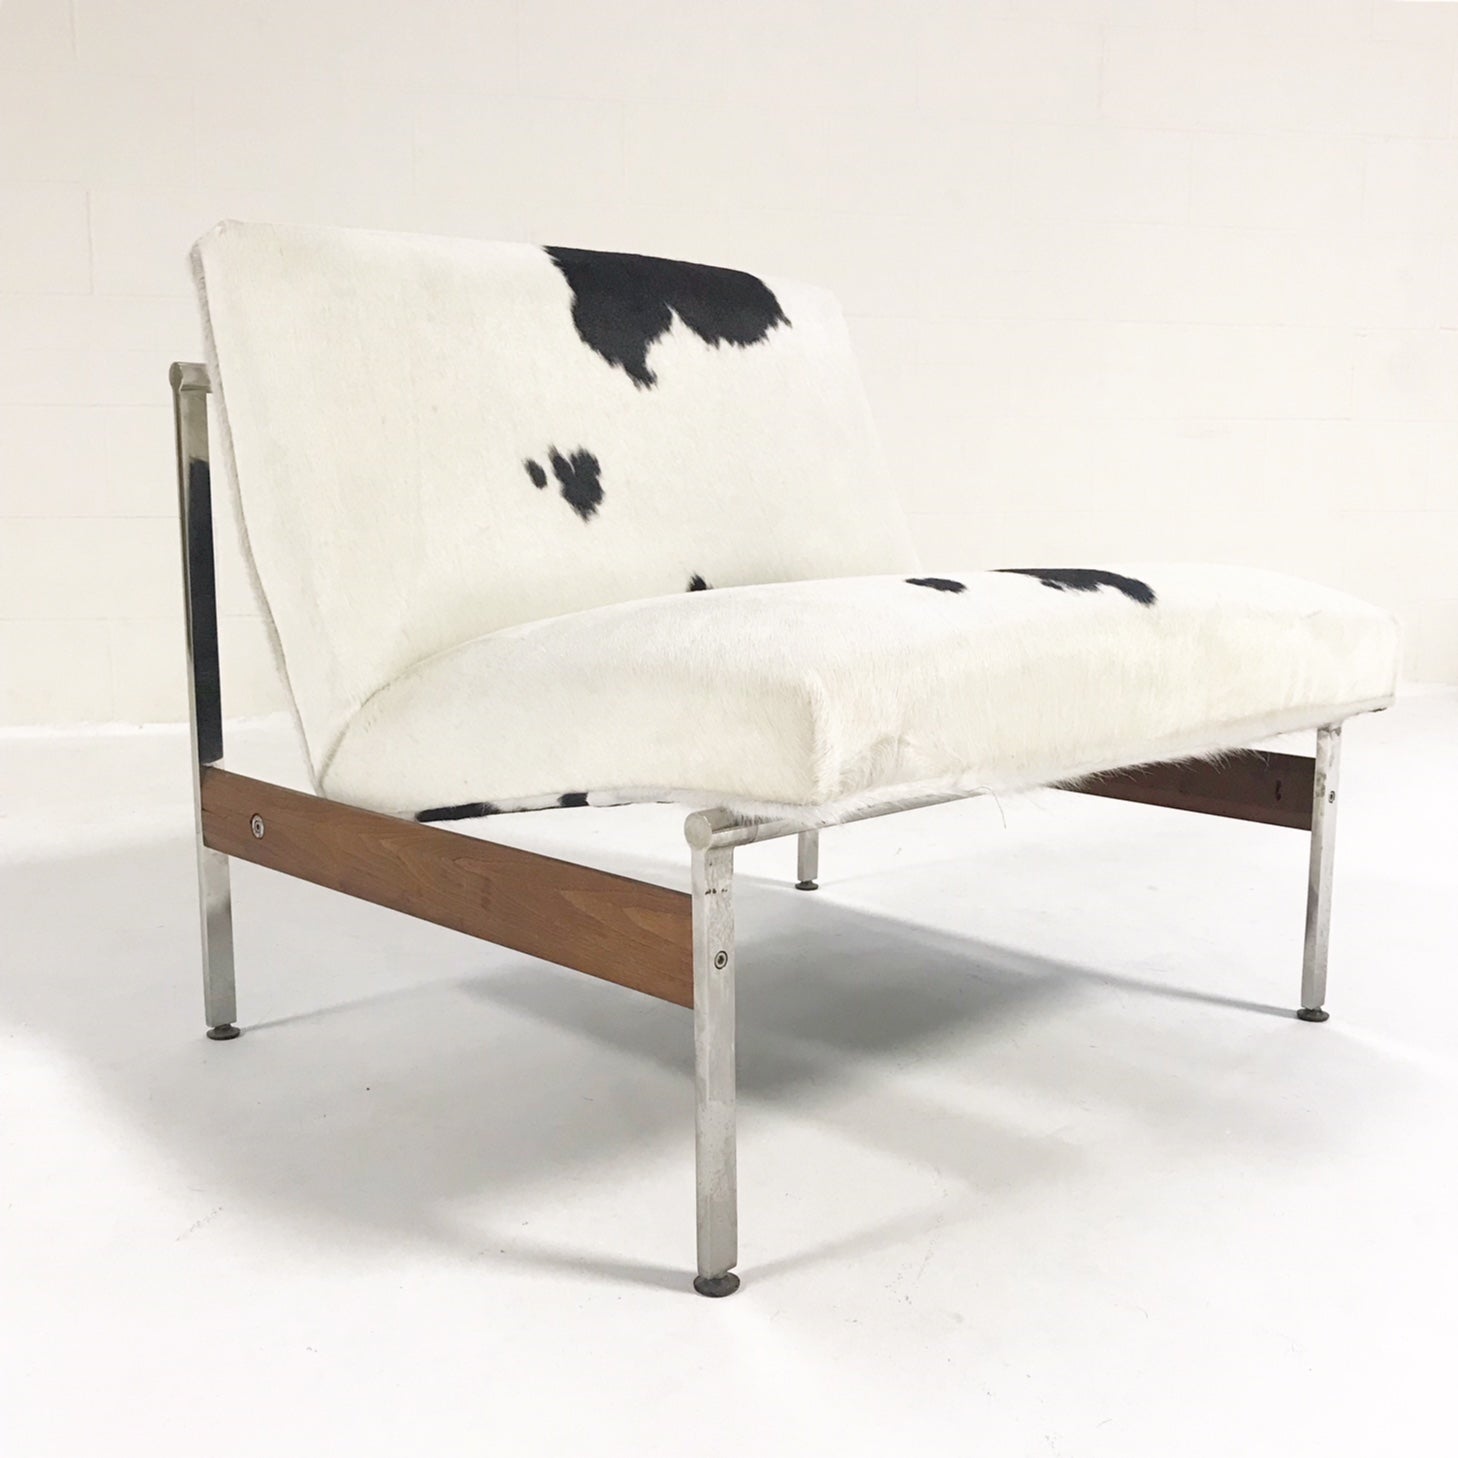 Lounge Chair in Brazilian Cowhide - FORSYTH